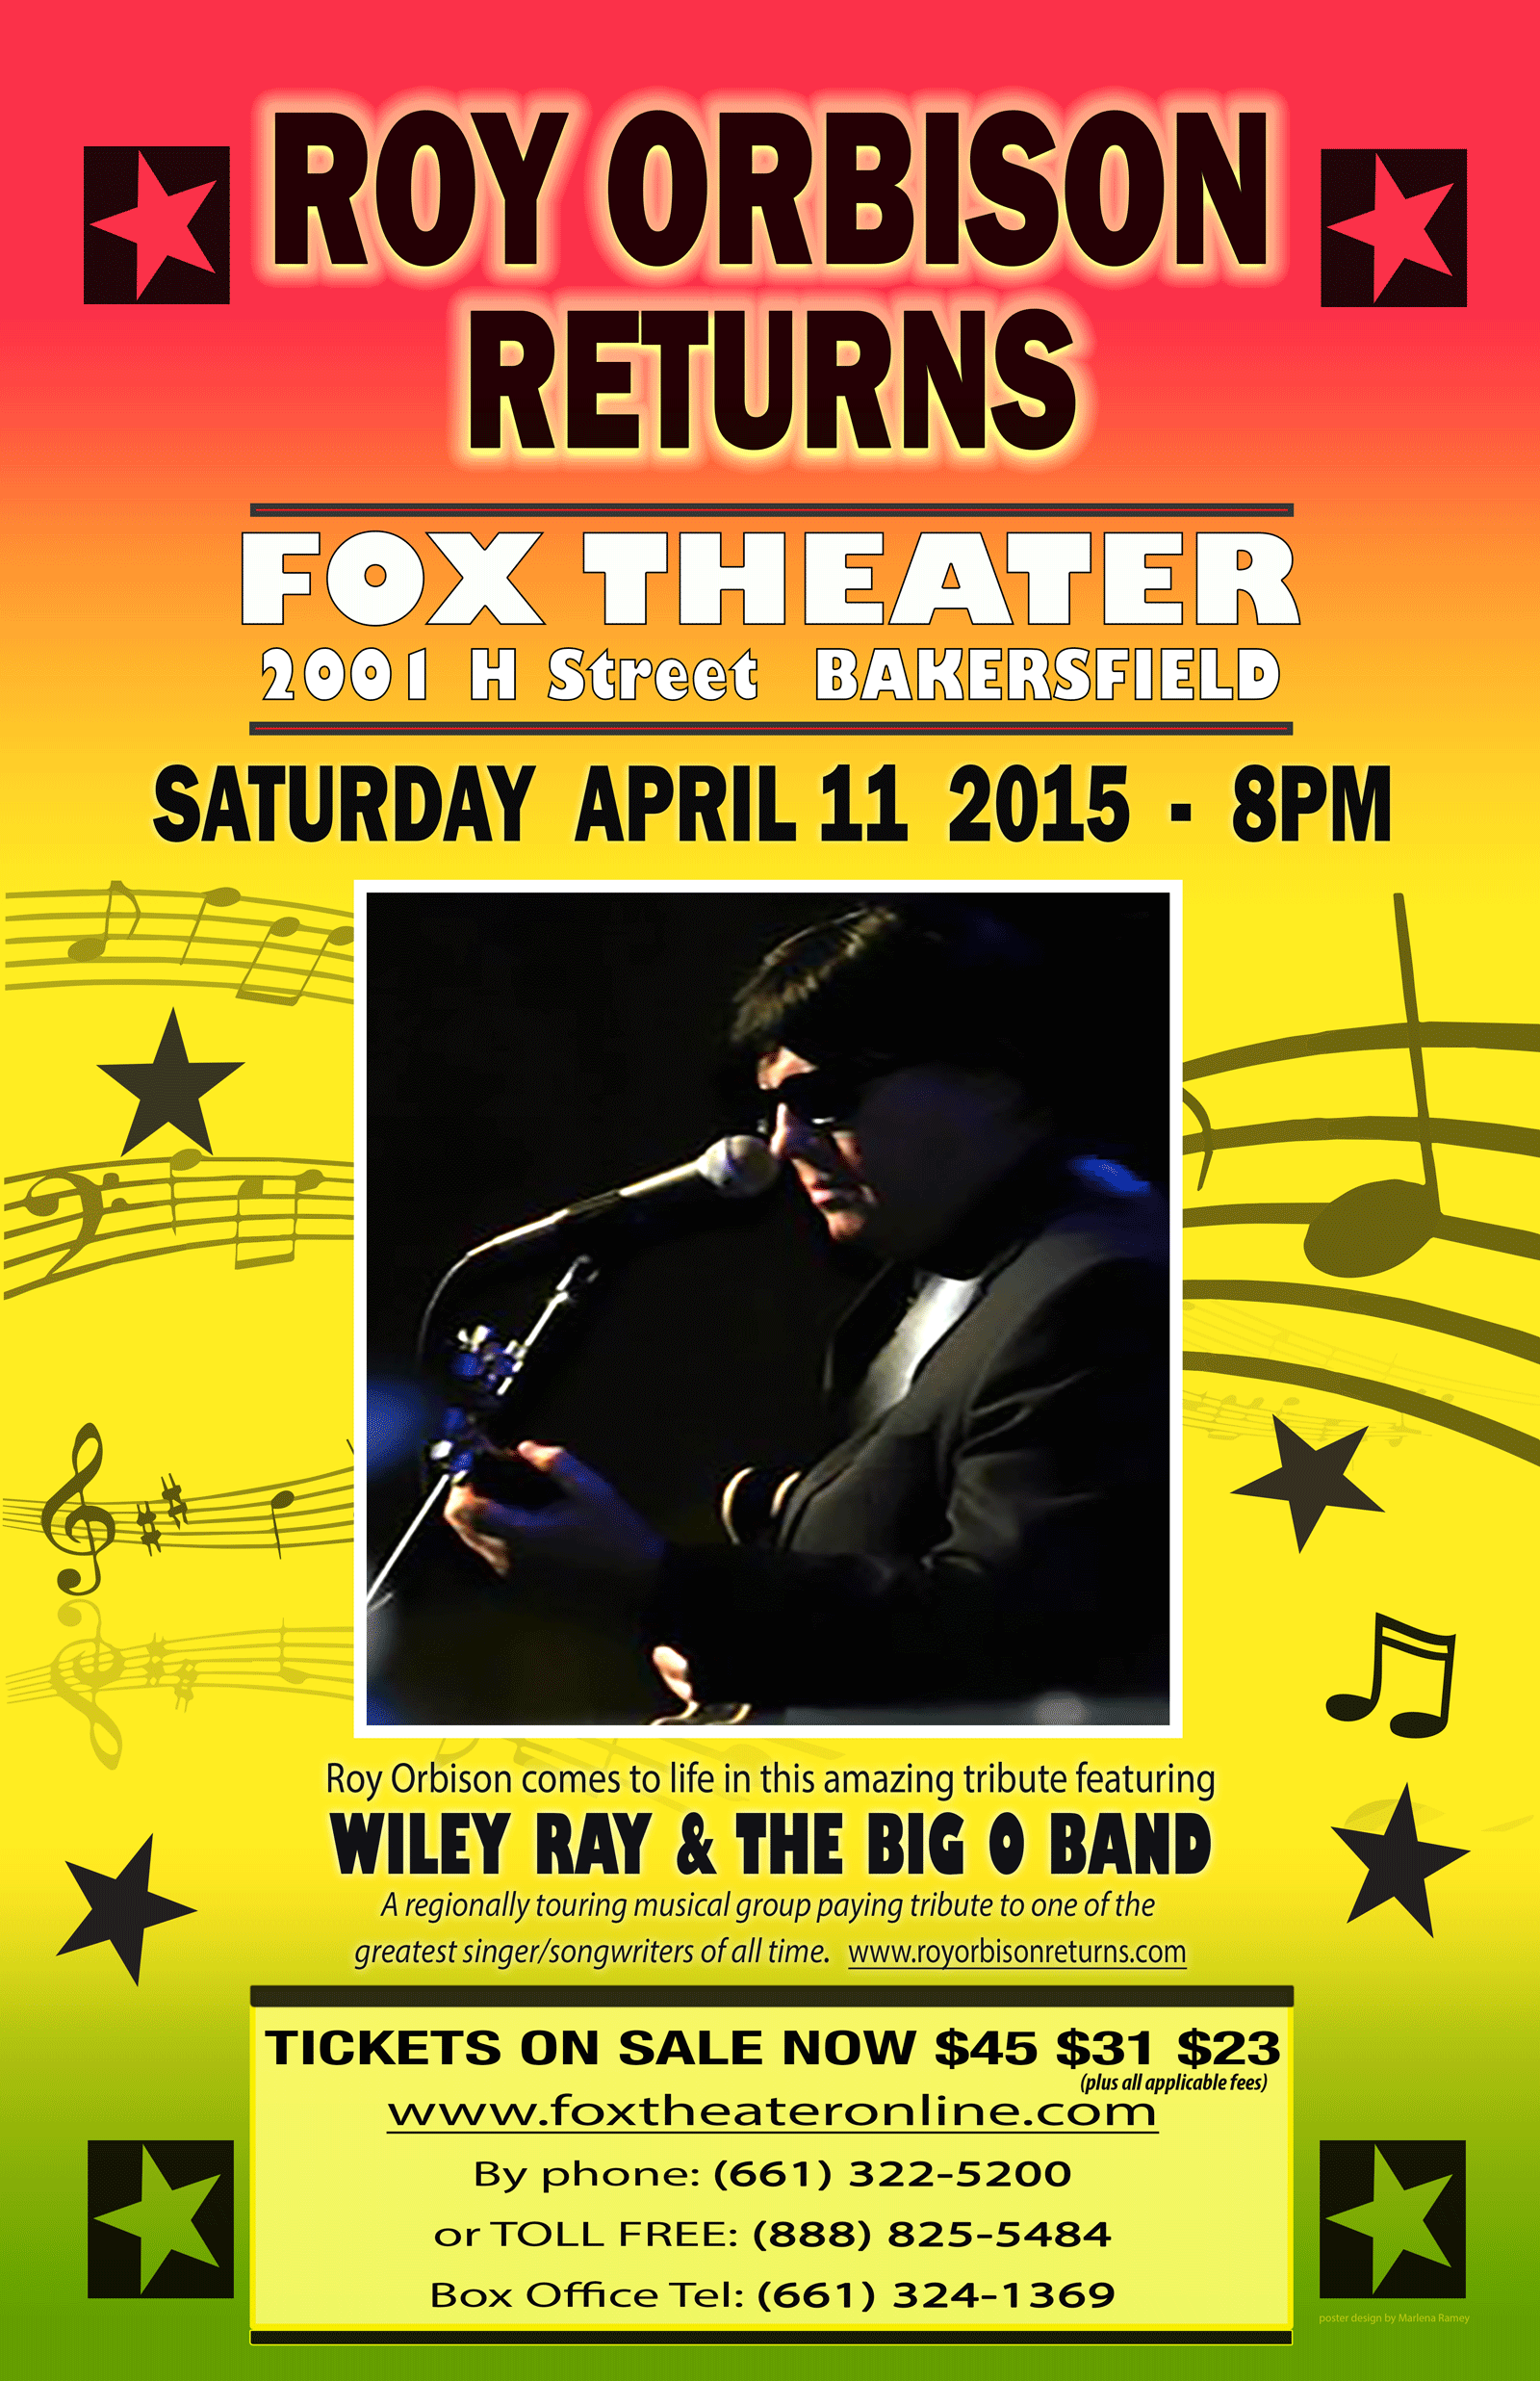 Poster of the Roy Orbison Return show at the Fox Theater in Bakersfield.